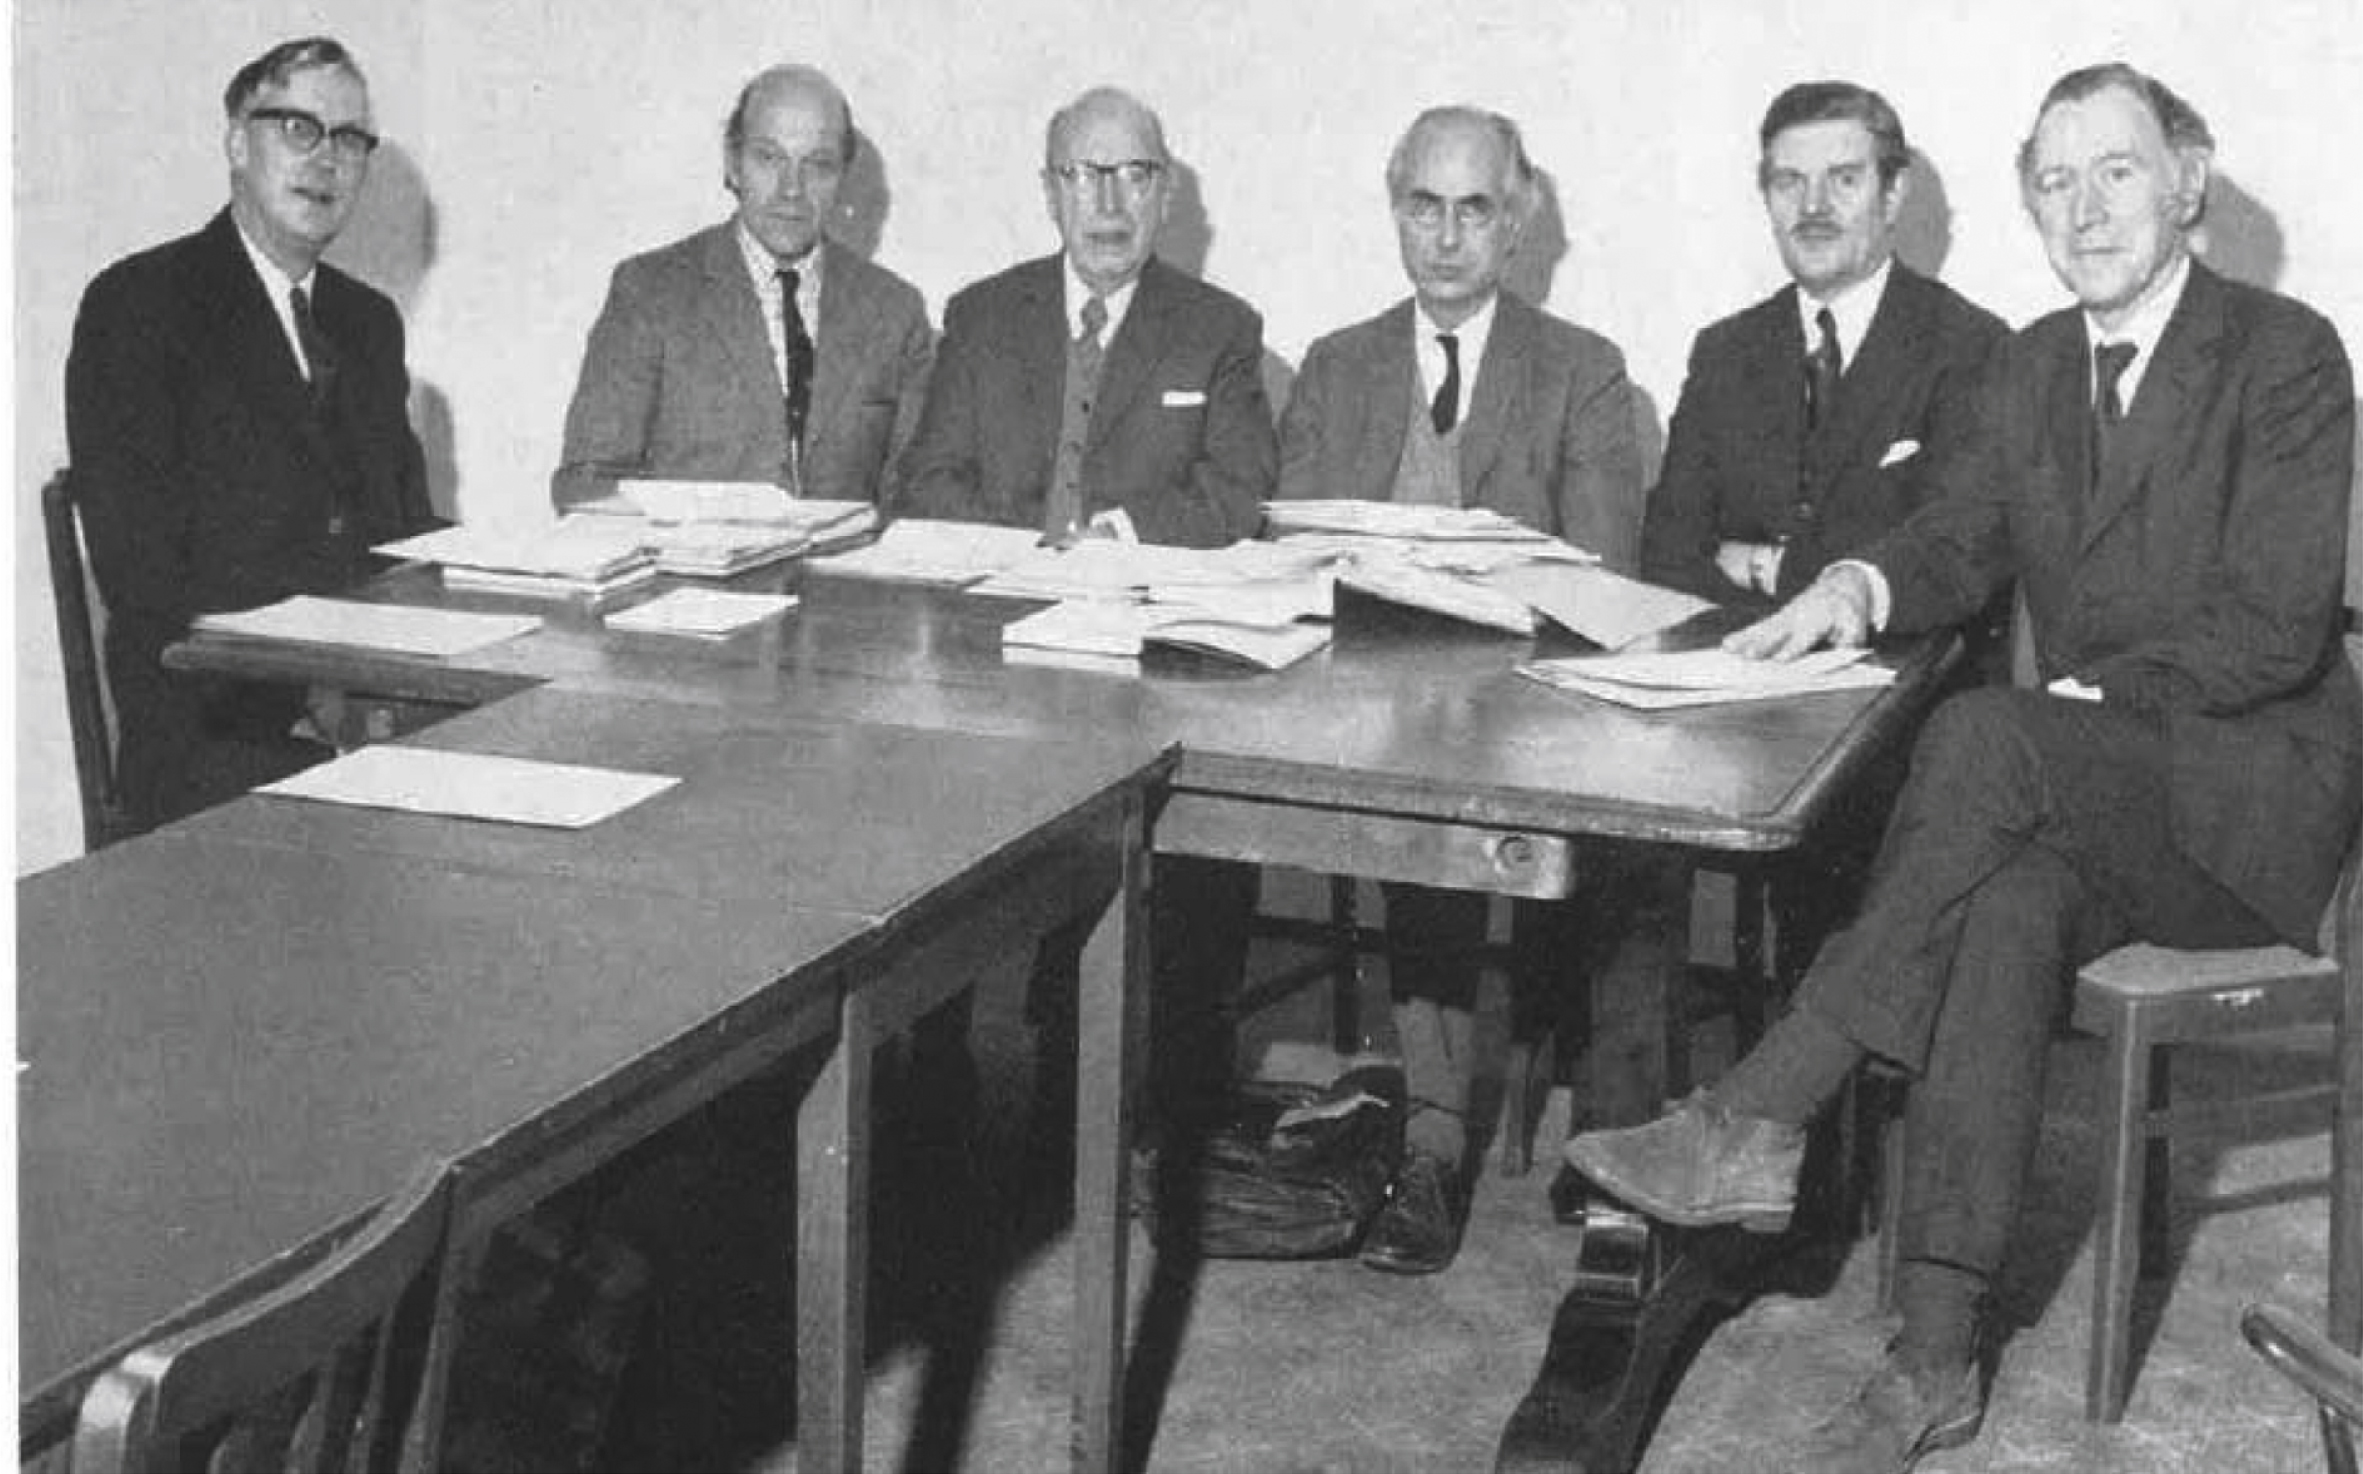 The Research Committee of the Muscular Dystrophy Group with – from the left - Professor Joe Smith (Birmingham), Professor Ian Simpson (Glasgow), Professor Fred Nattrass, Professor Sir Andrew Huxley (a Nobel Laureate and Chairman of the Committee), John Walton and Professor Victor Perry..